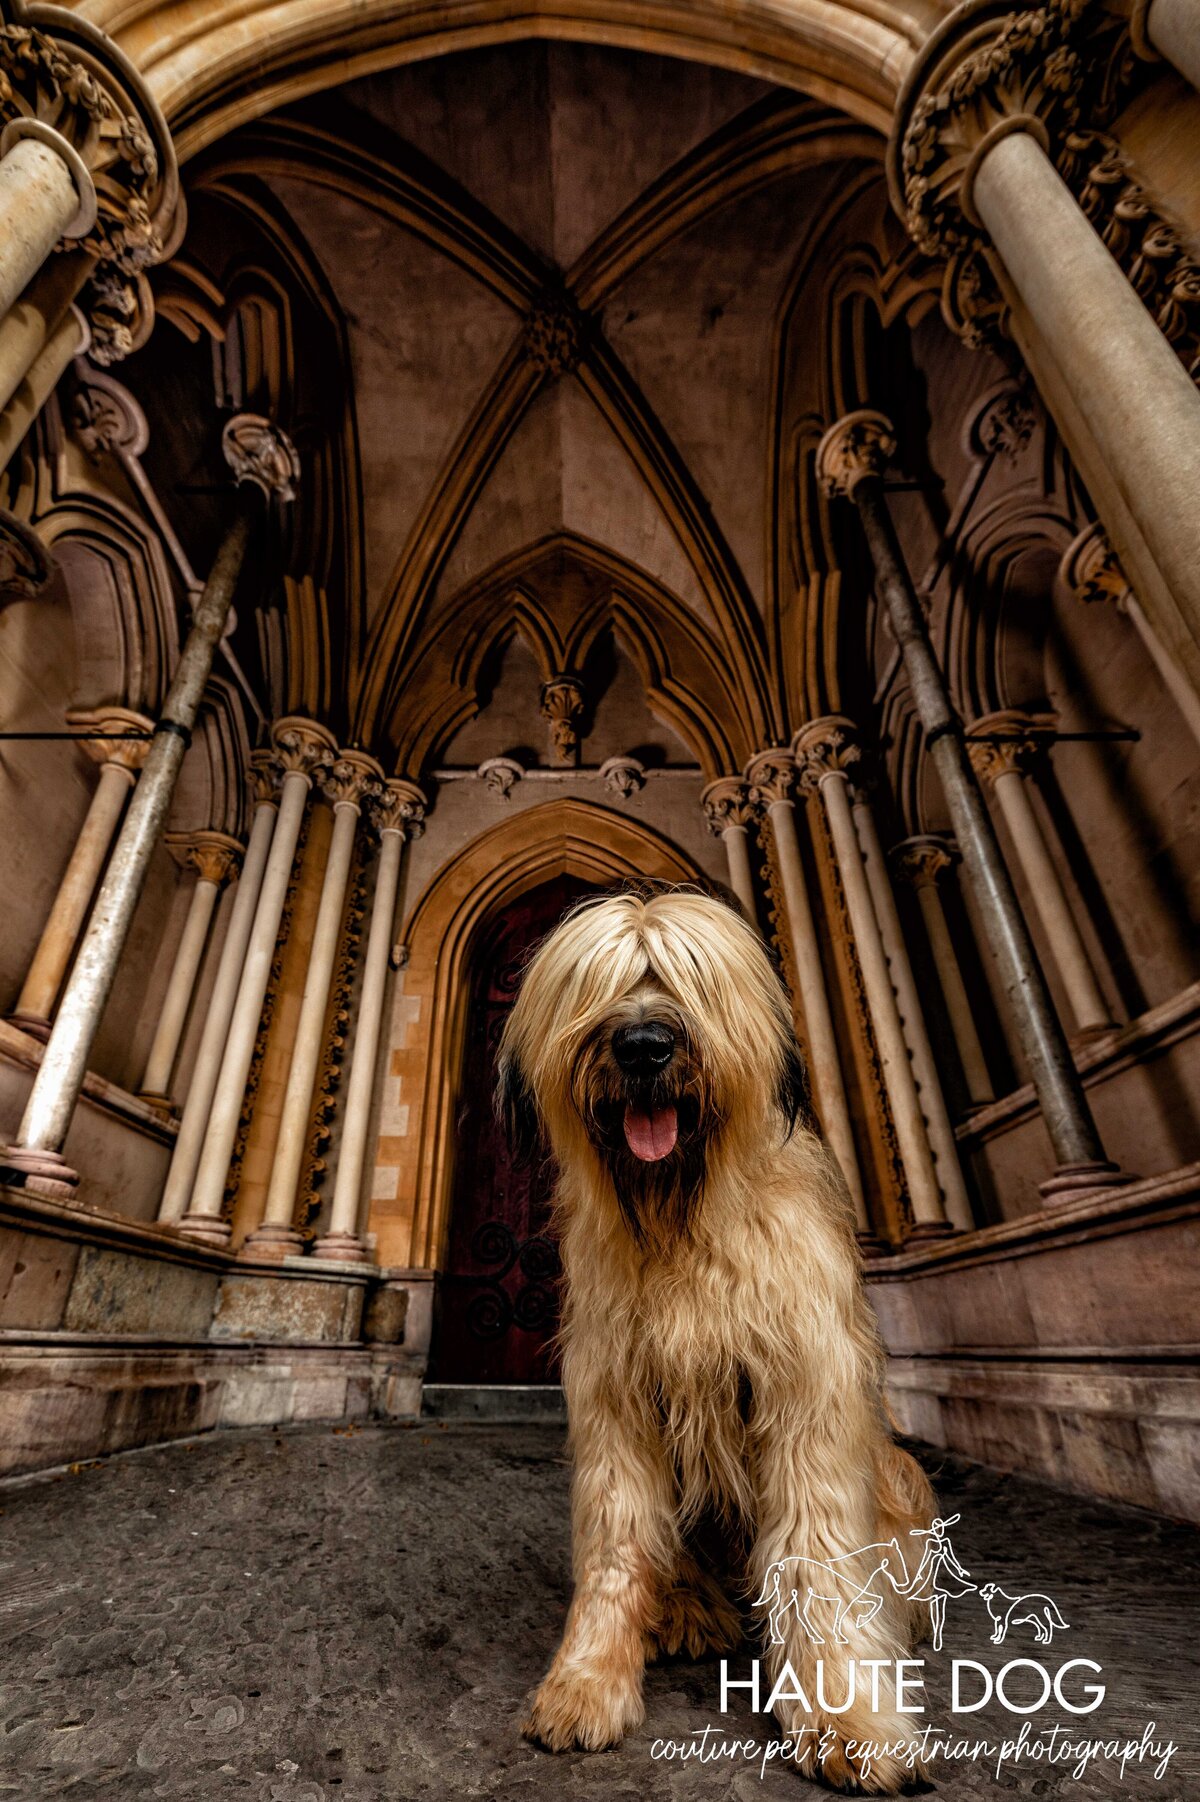 A shaggy Briard with hair covering its eyes poses for portrait at a cathedral.